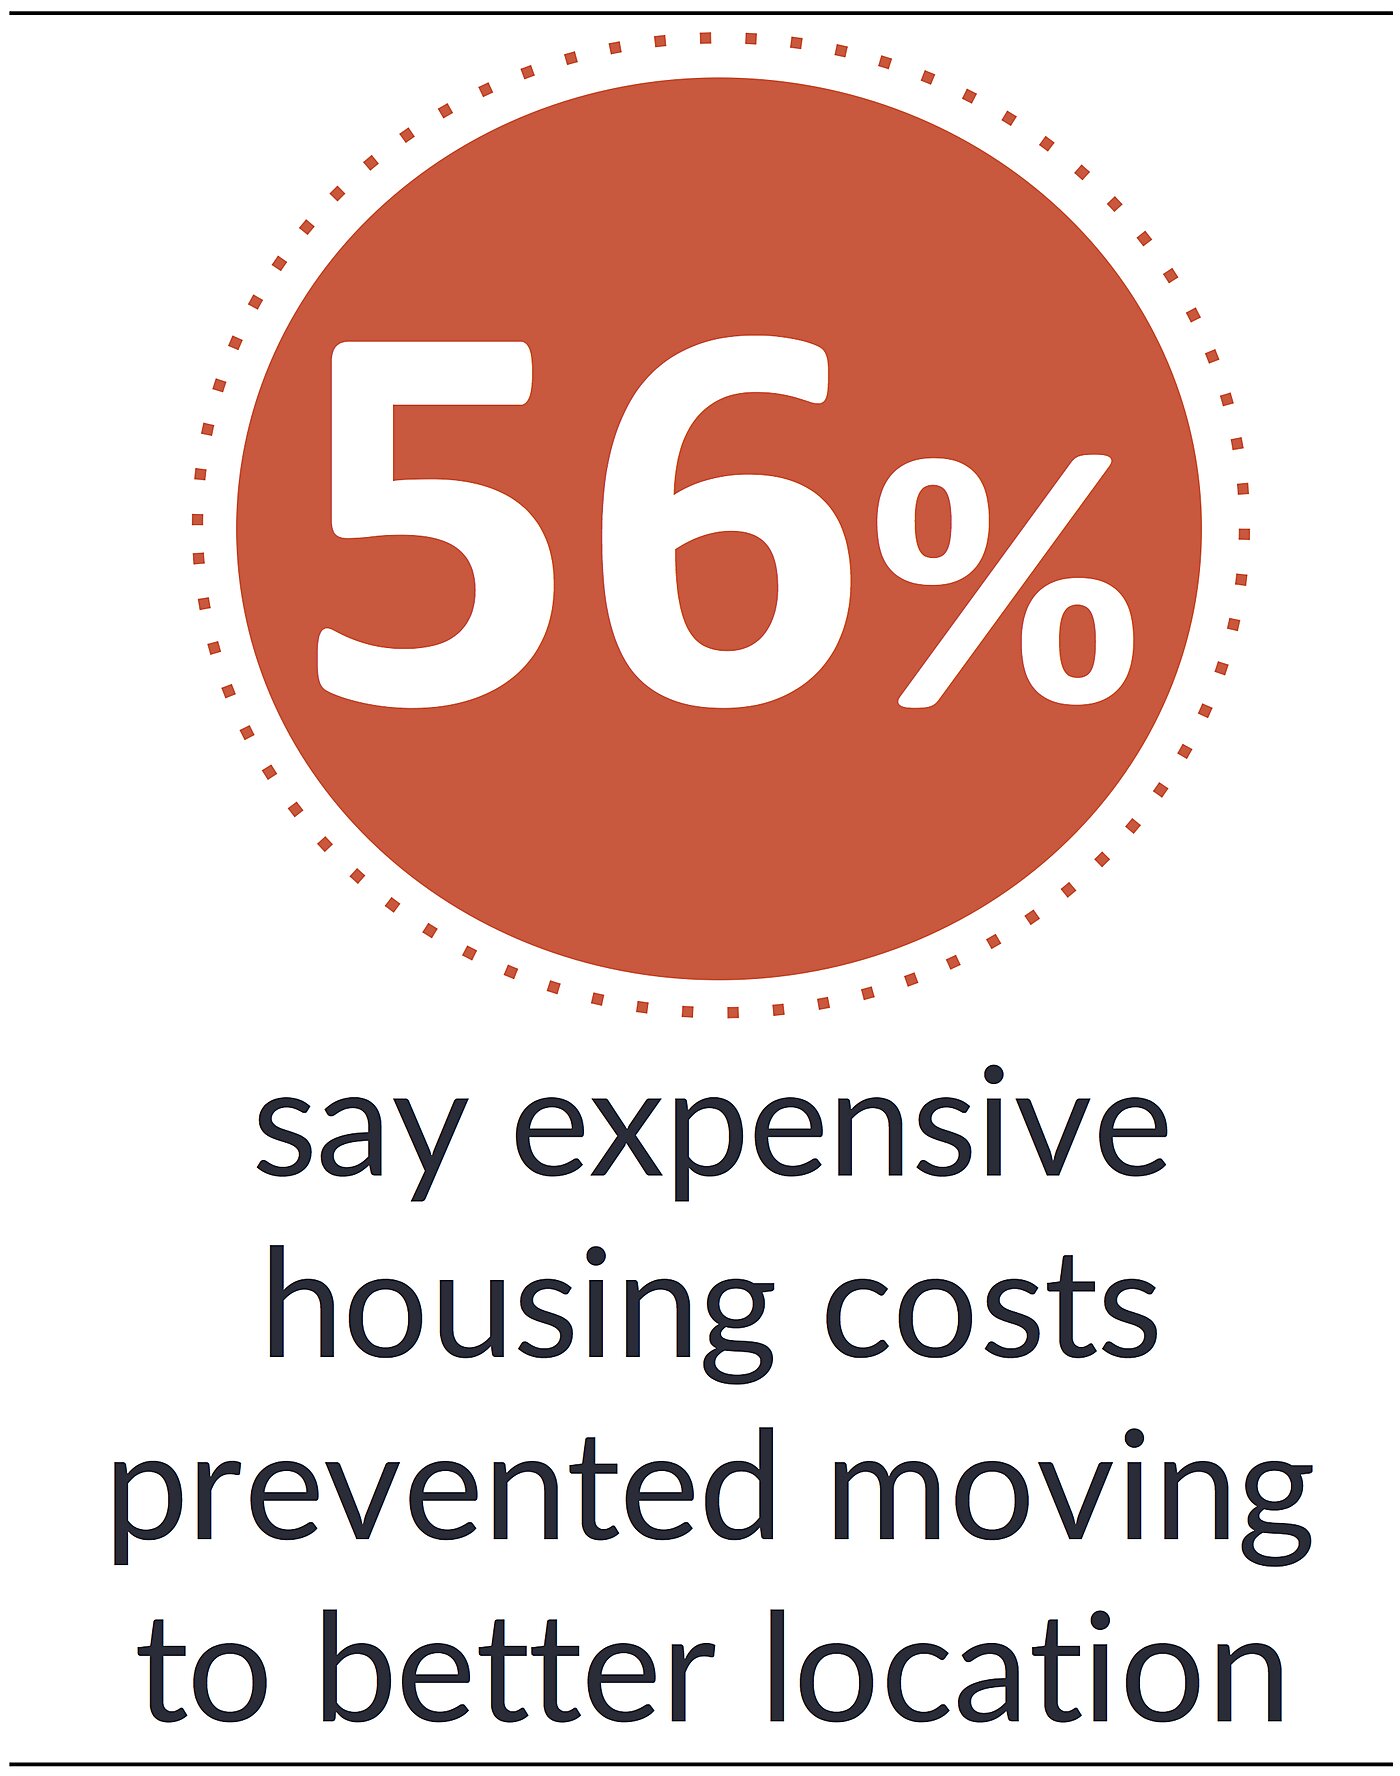 Most say expensive housing costs prevented them from moving to a better location